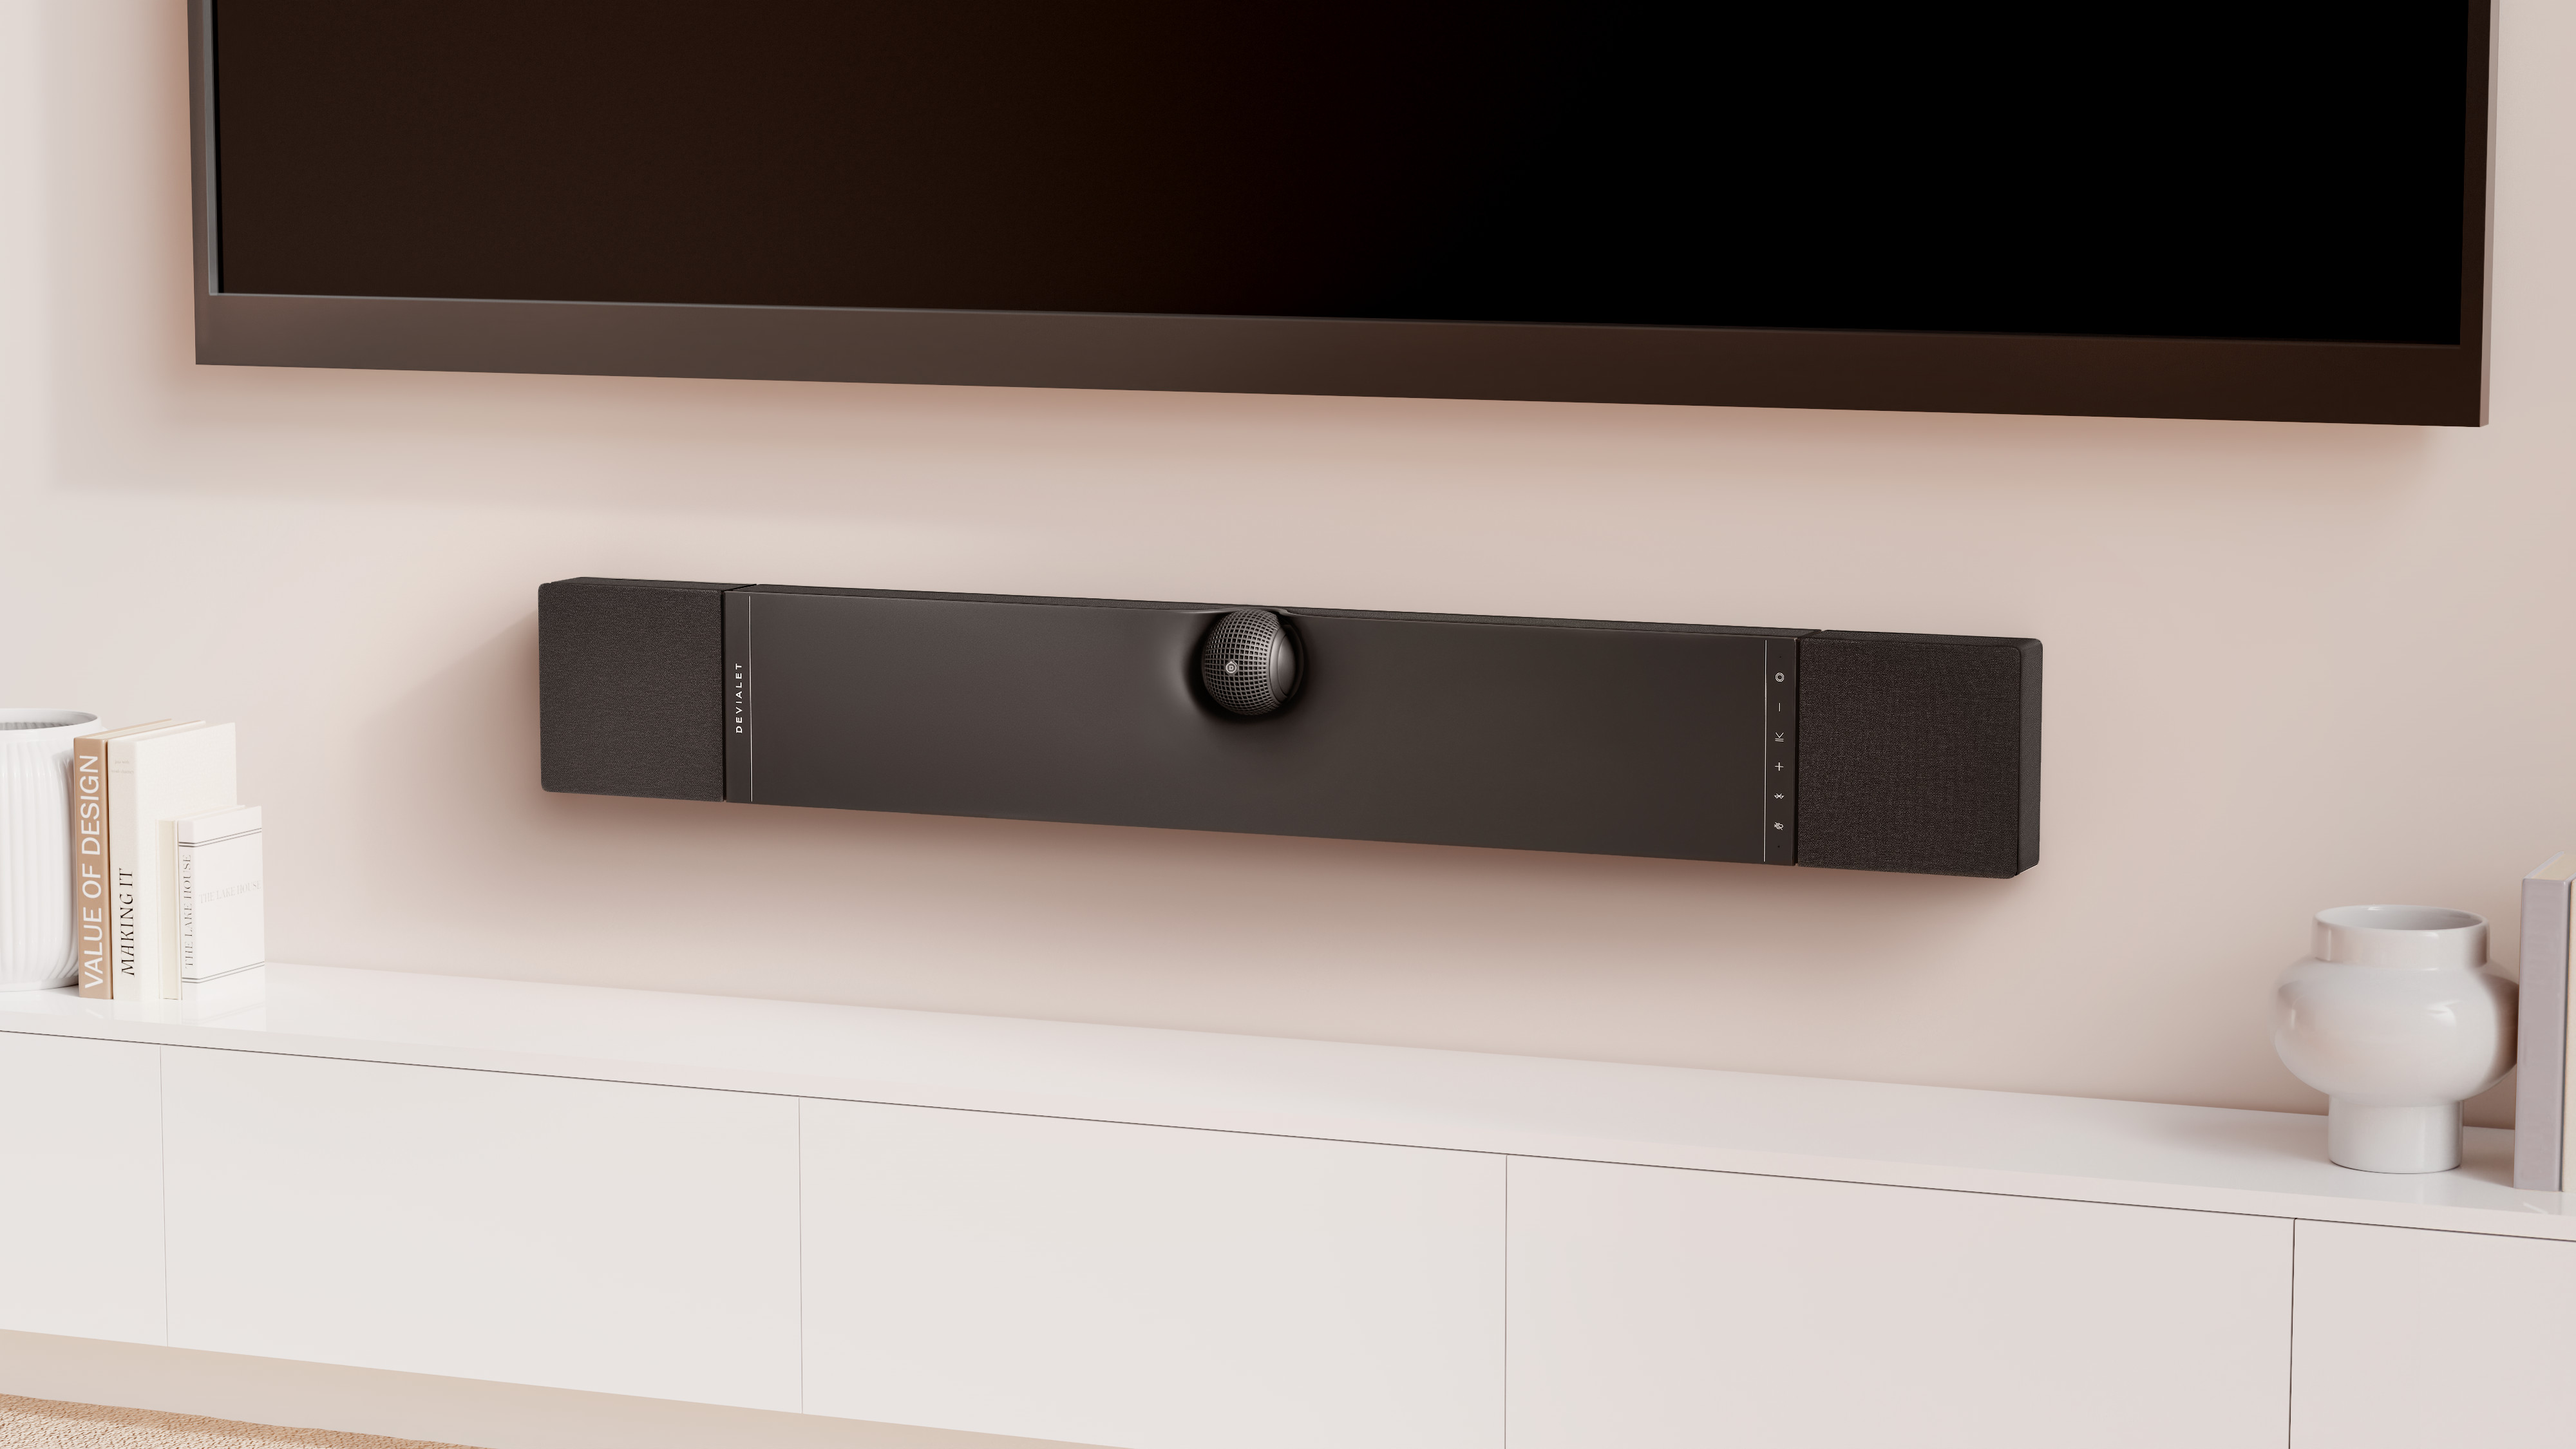 Performance Sheet monitor The best soundbar in 2022: top picks from Sonos, Bose, Yamaha and more |  Tom's Guide